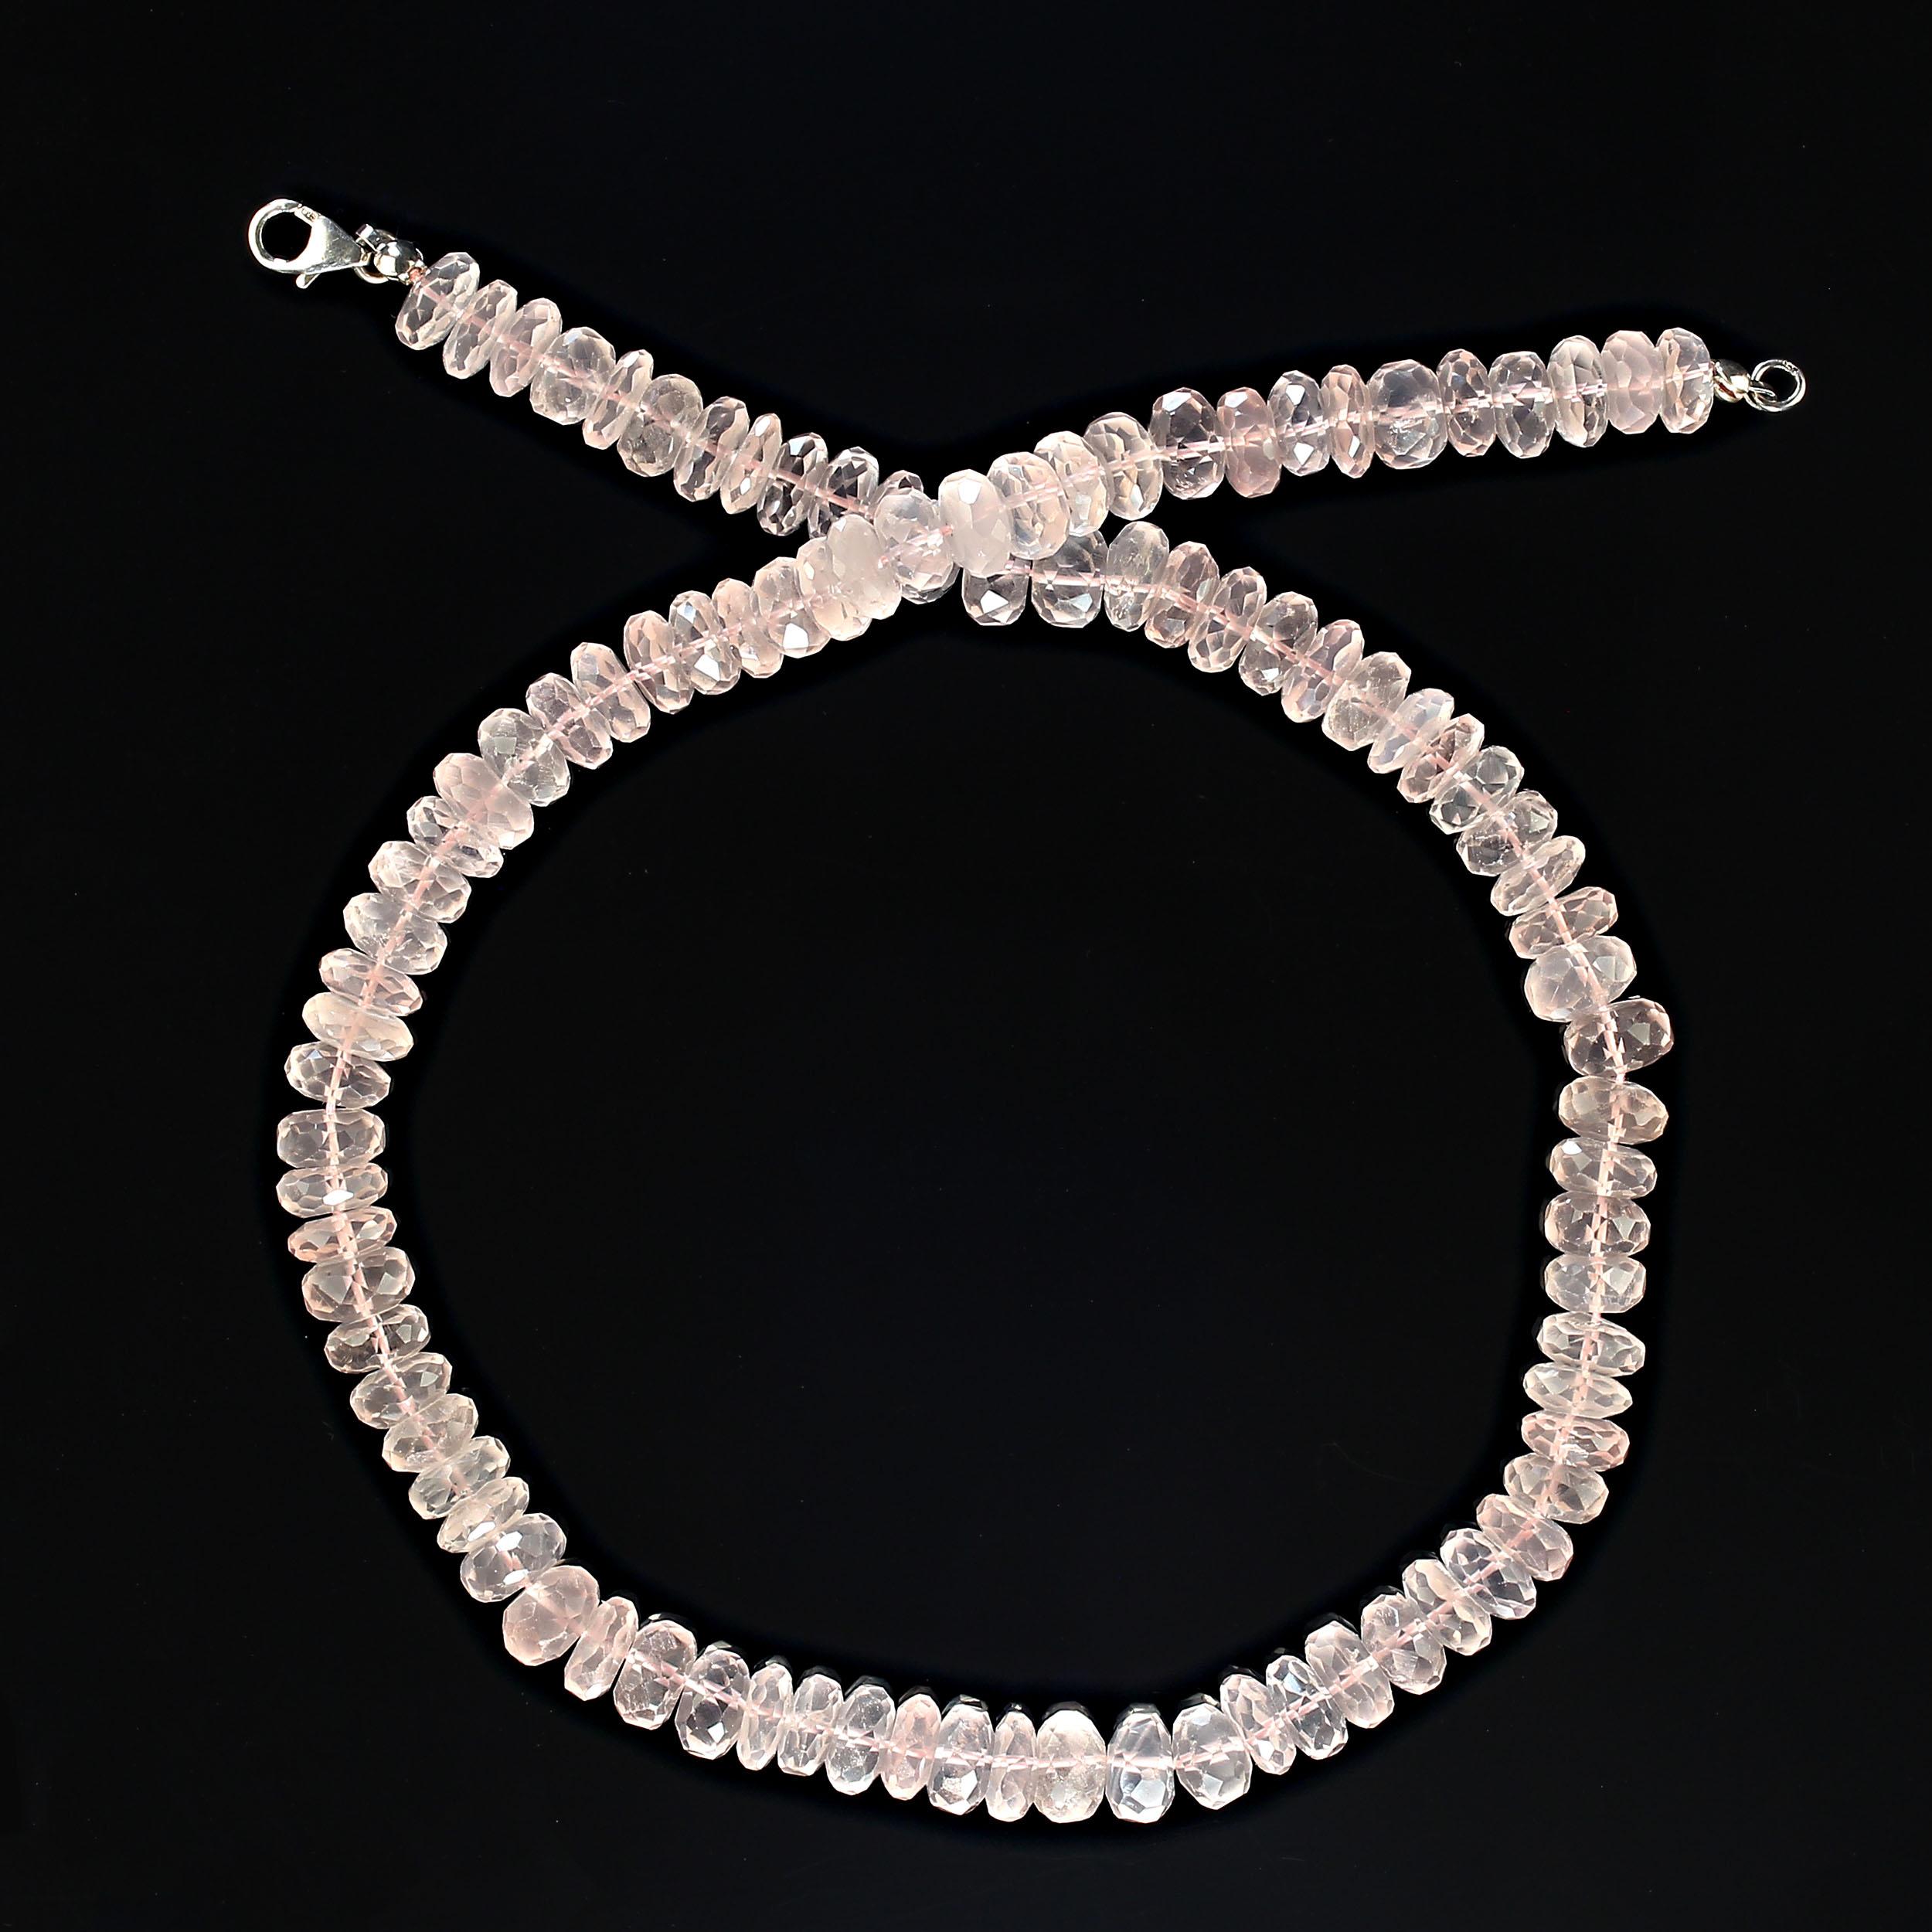 
17 Inch Rose Quartz necklace of 8 mm faceted transparent/translucent rondelles.  This gorgeous necklace is perfect for dinner out is it loves the light and sparkles as you move.  The 17 in length fits just inside most necklines.  The necklace is